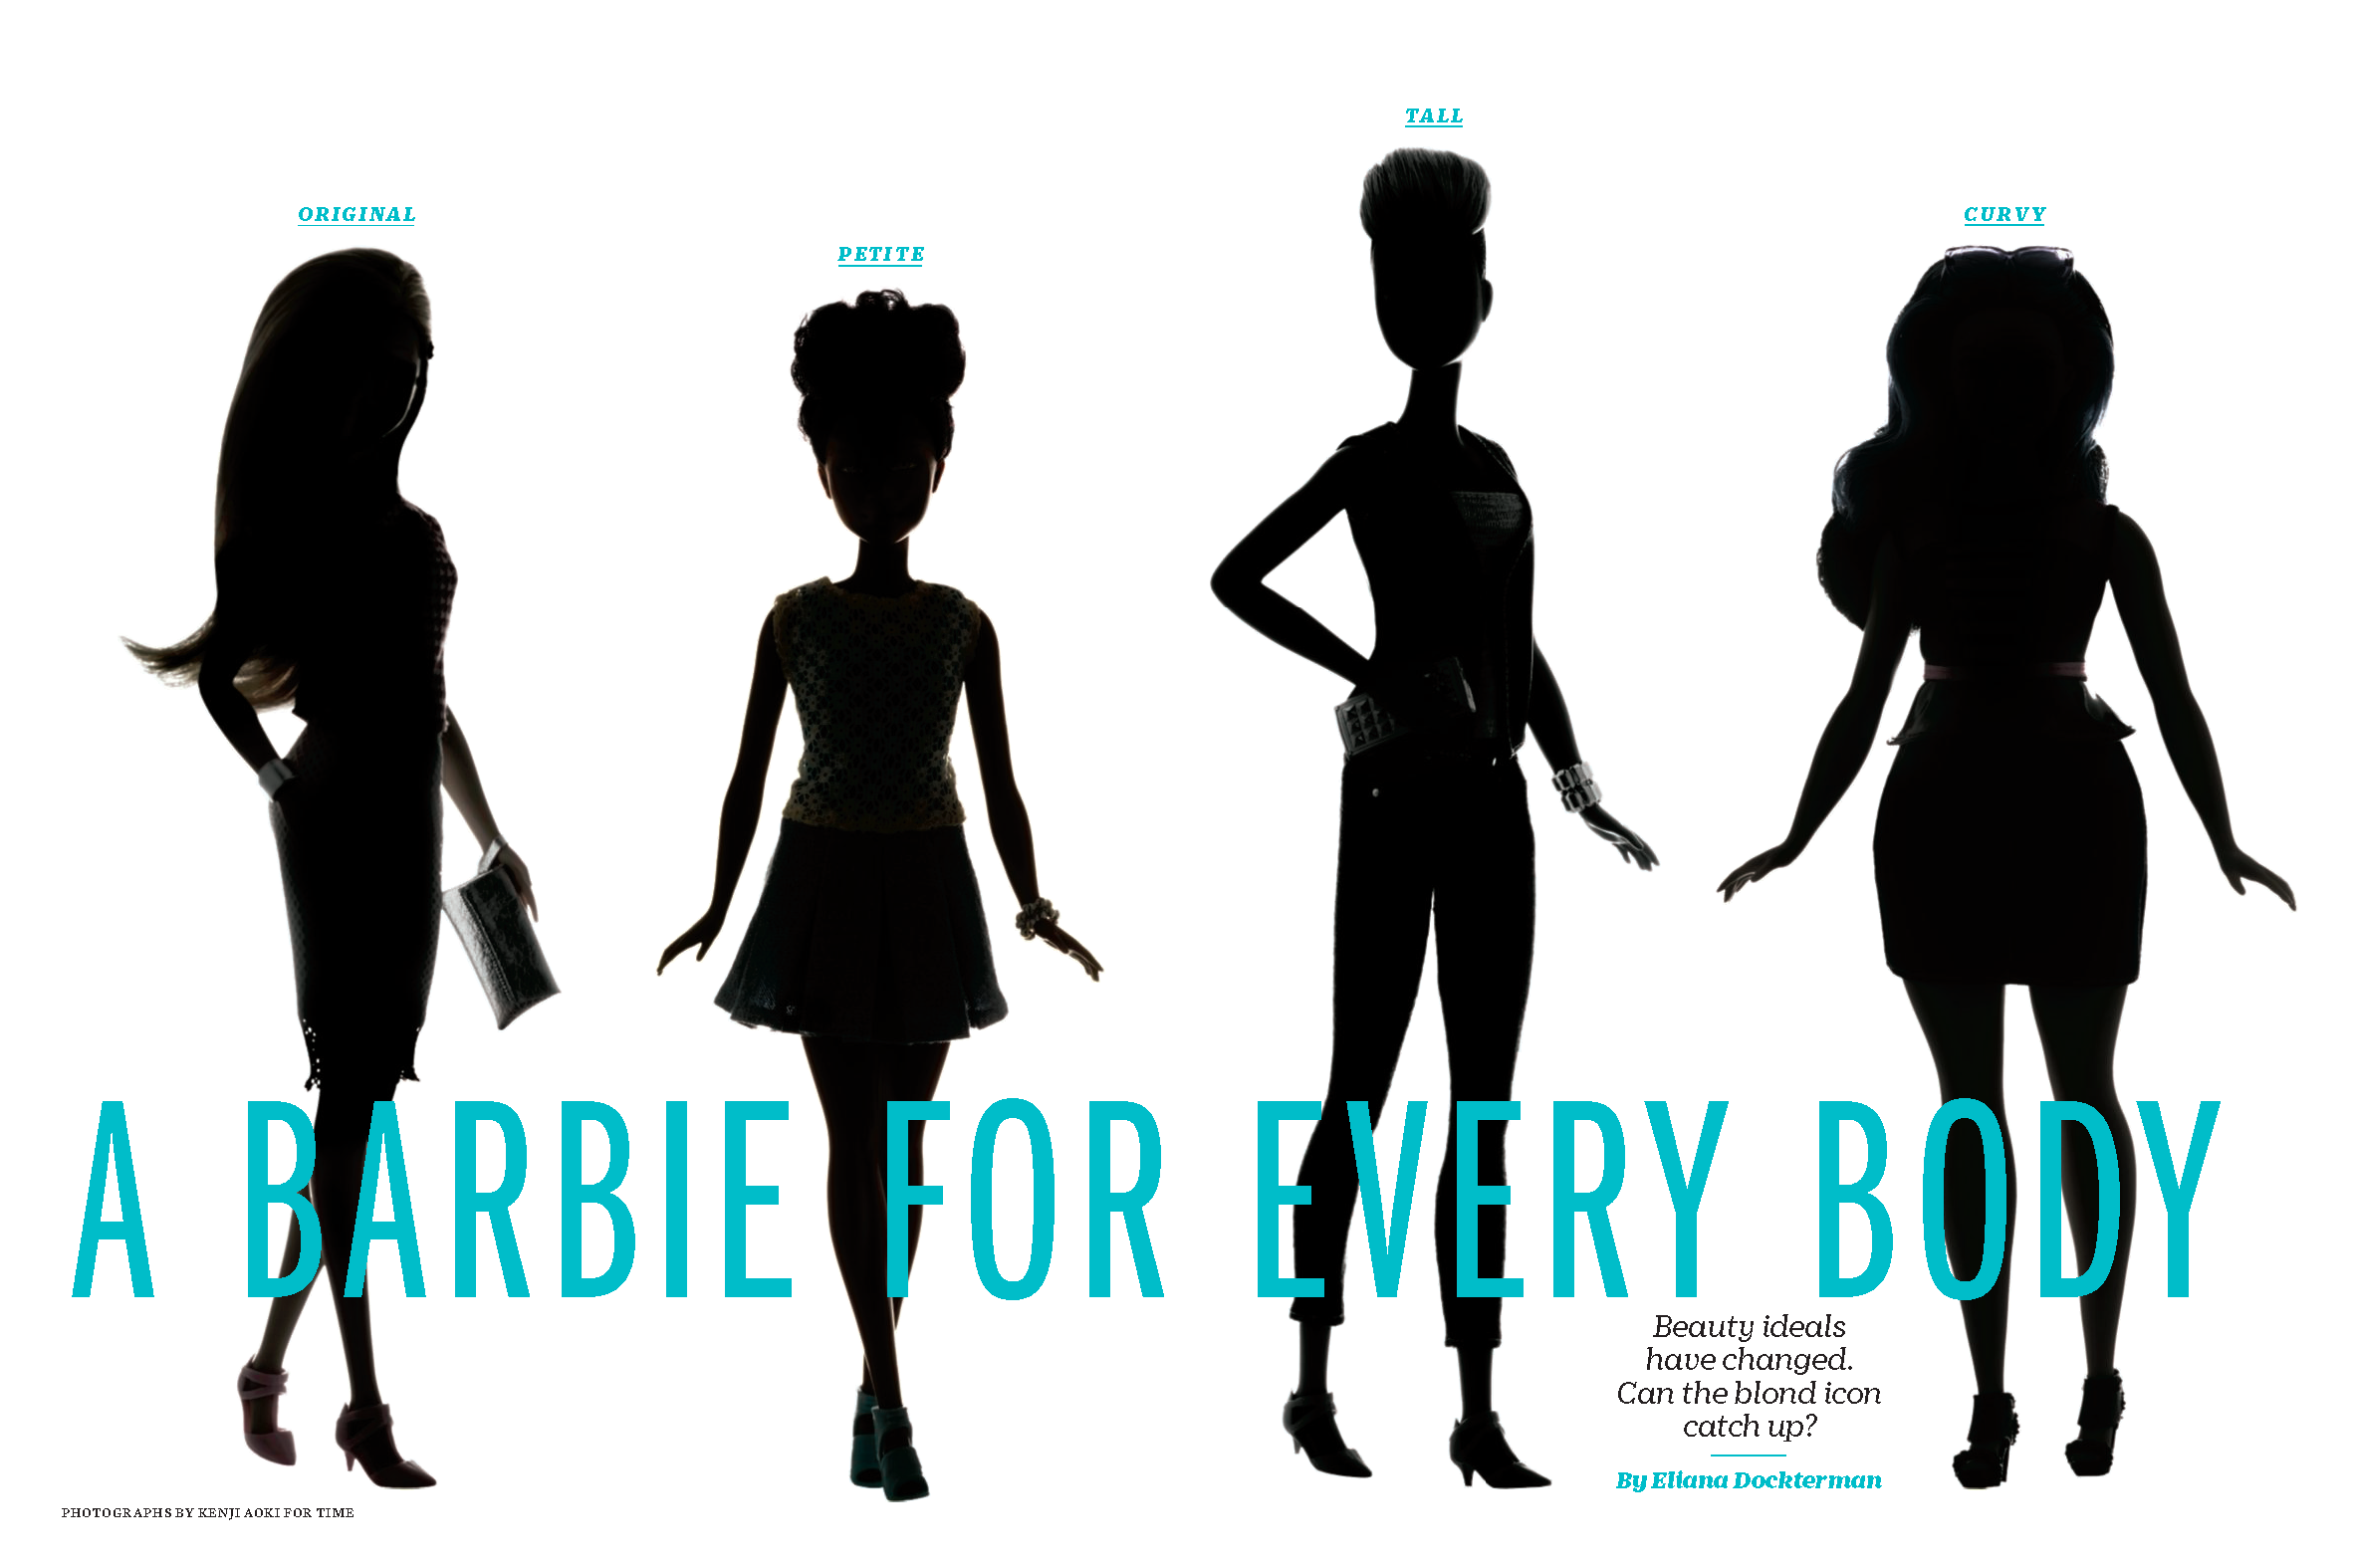 A Barbie for every body